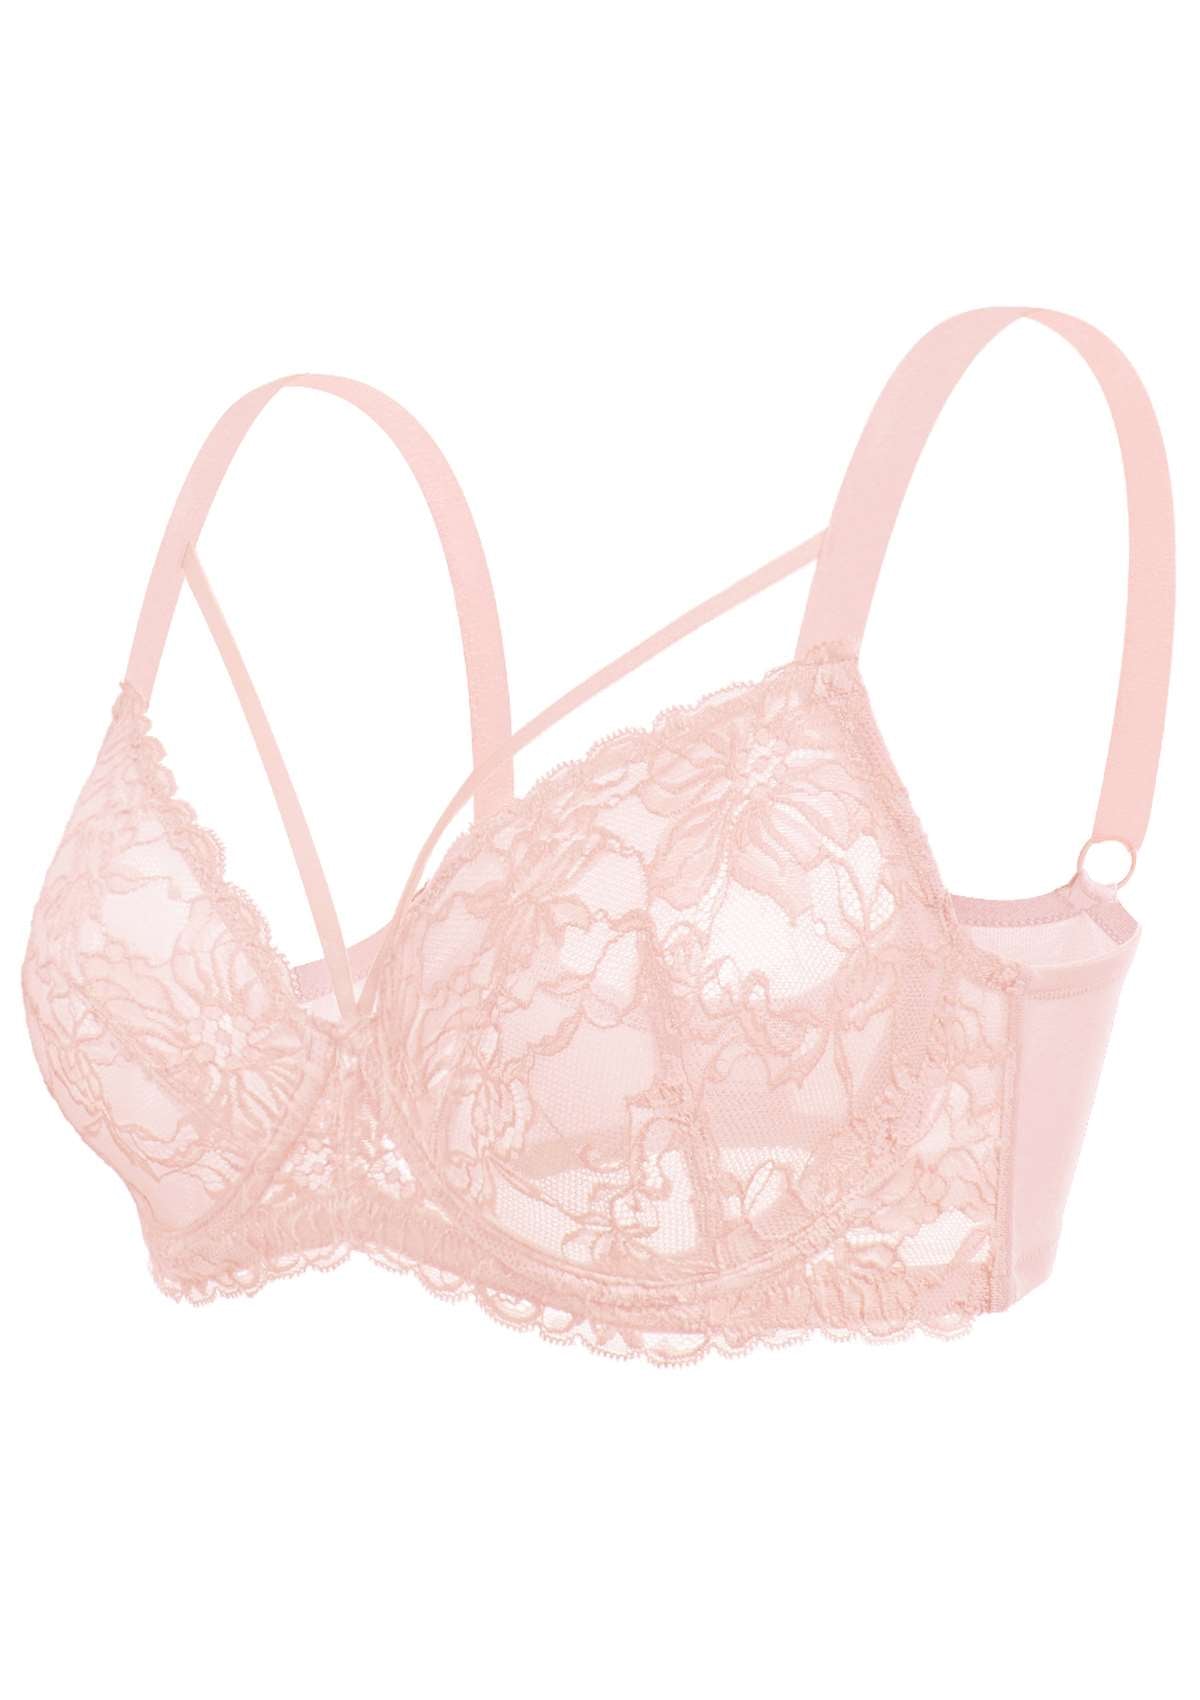 HSIA Pretty In Petals: Strappy Lace Sheer Bra For Side And Back Fat - Beige Cream / 34 / H